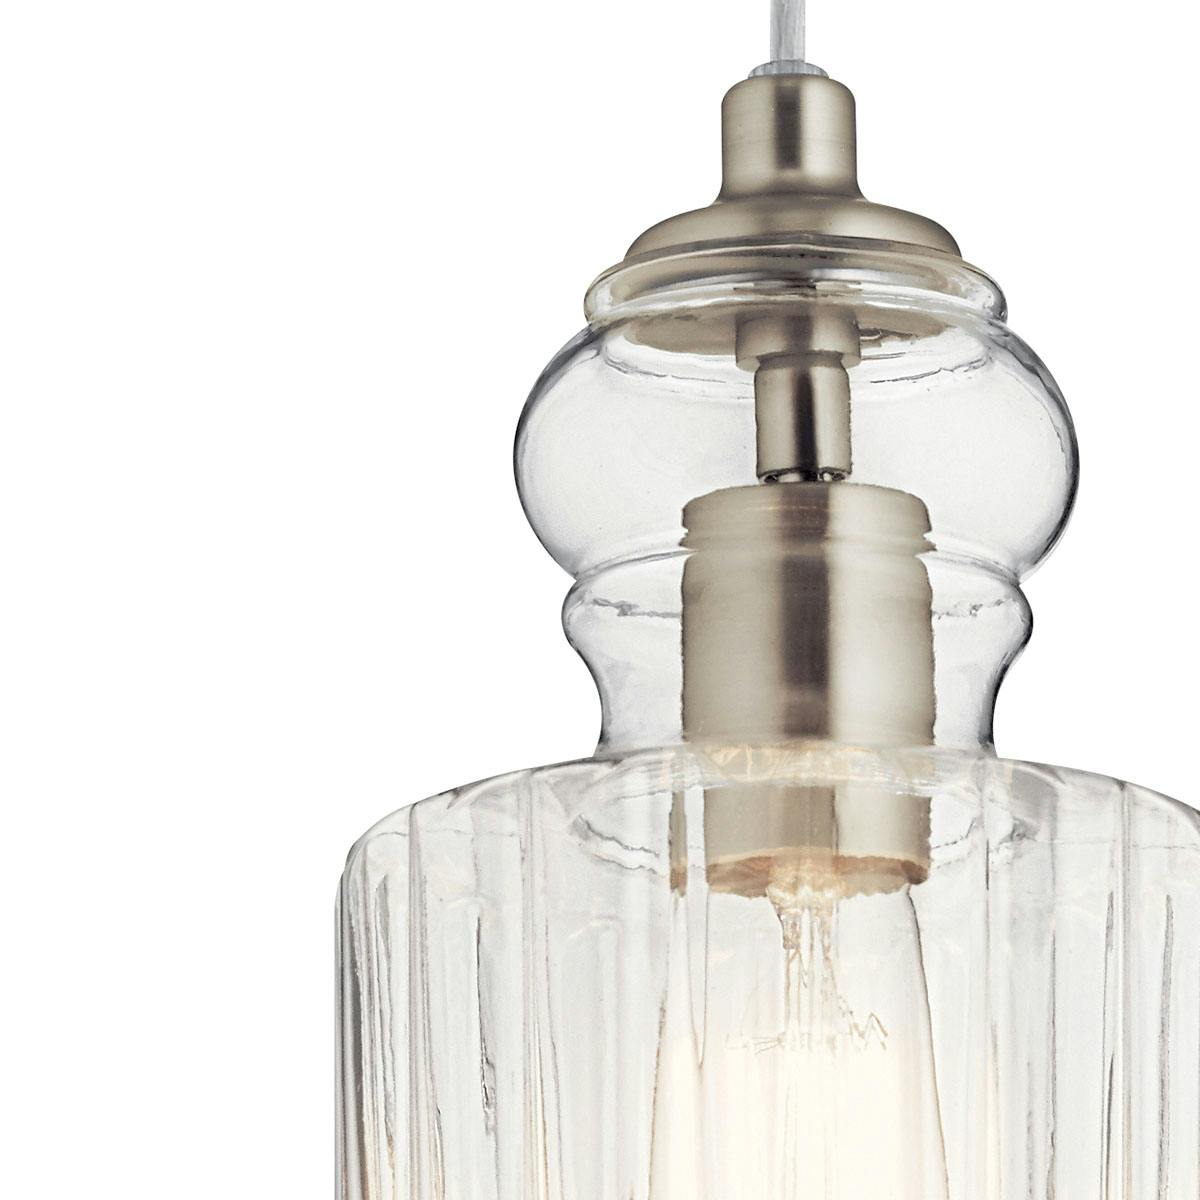 Close up view of the Riviera 10.75" 1 Light Pendant in Nickel on a white background